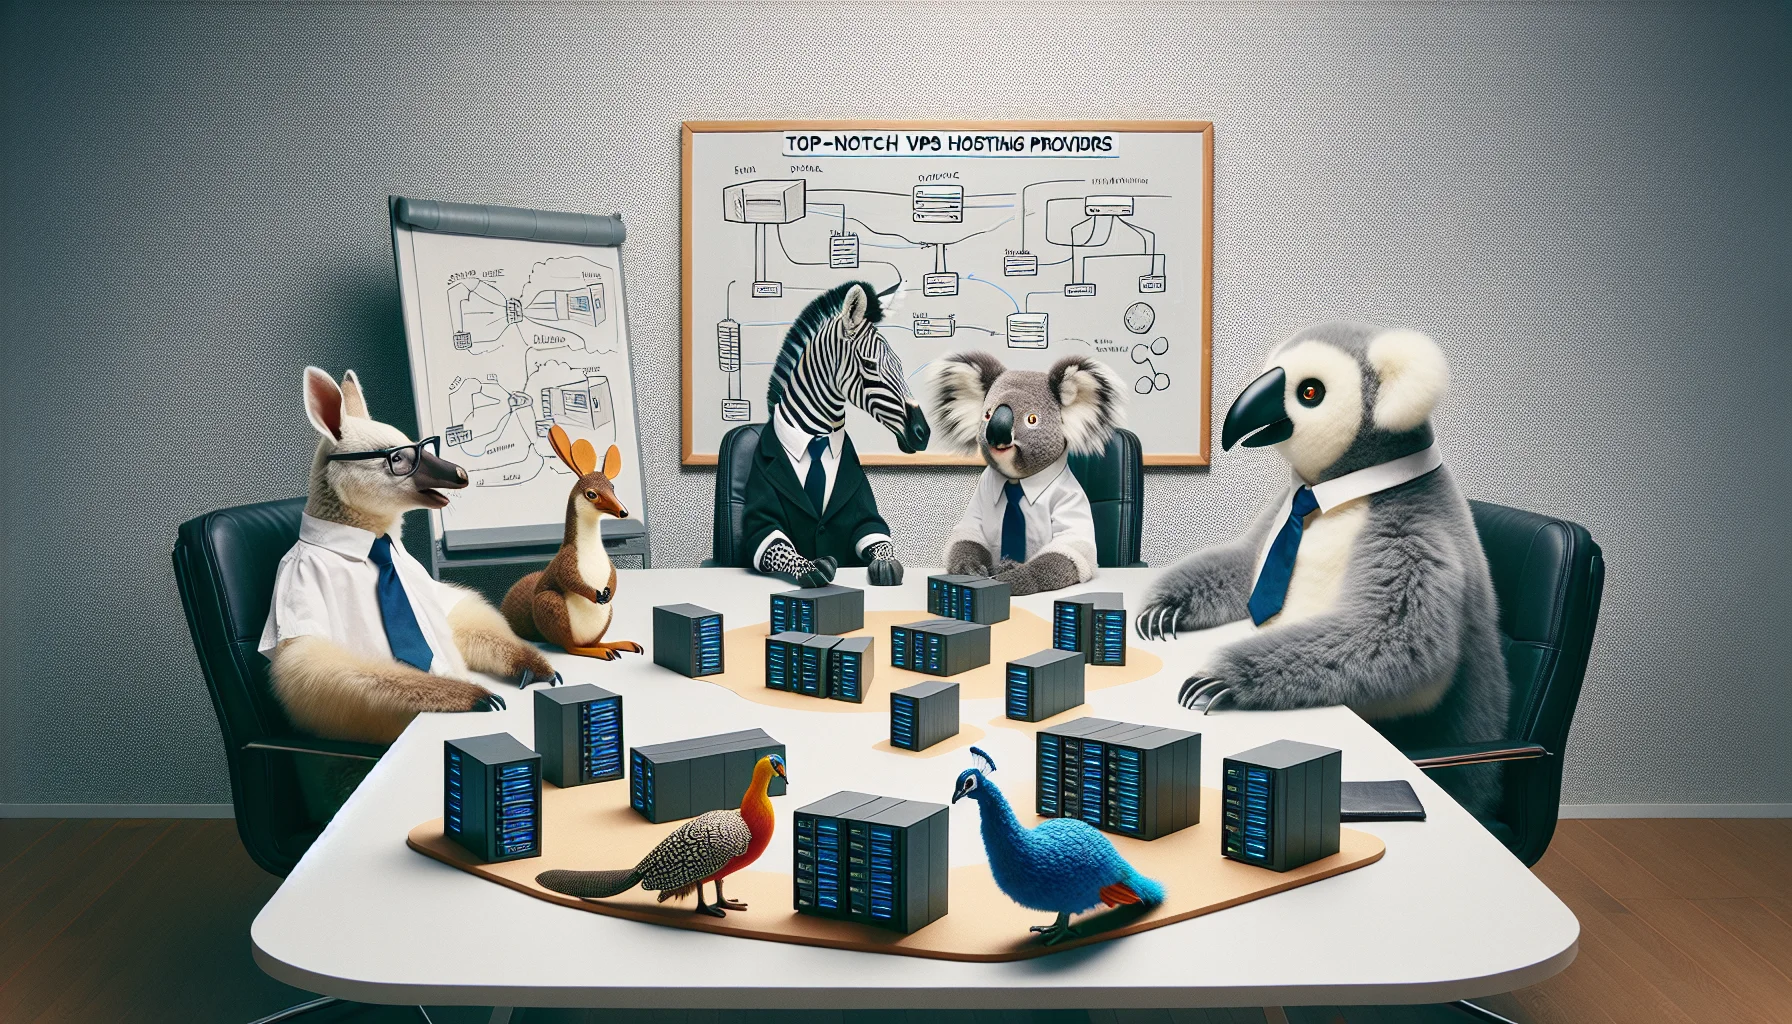 Create a fanciful and humorous scene, envisioning various animals representing 'top-notch VPS hosting providers'. Picture a zebra, a platypus, a koala, and a peacock, all sitting around a conference table holding a discussion. The table is scattered with miniature models of servers and network cables, and there's a whiteboard in the background with complex diagrams. They each wear a pair of glasses and a tie, portray them as animated and engaged in lively discussion, emphasizing lighthearted and enticing aspects typical of a web-hosting scenario.